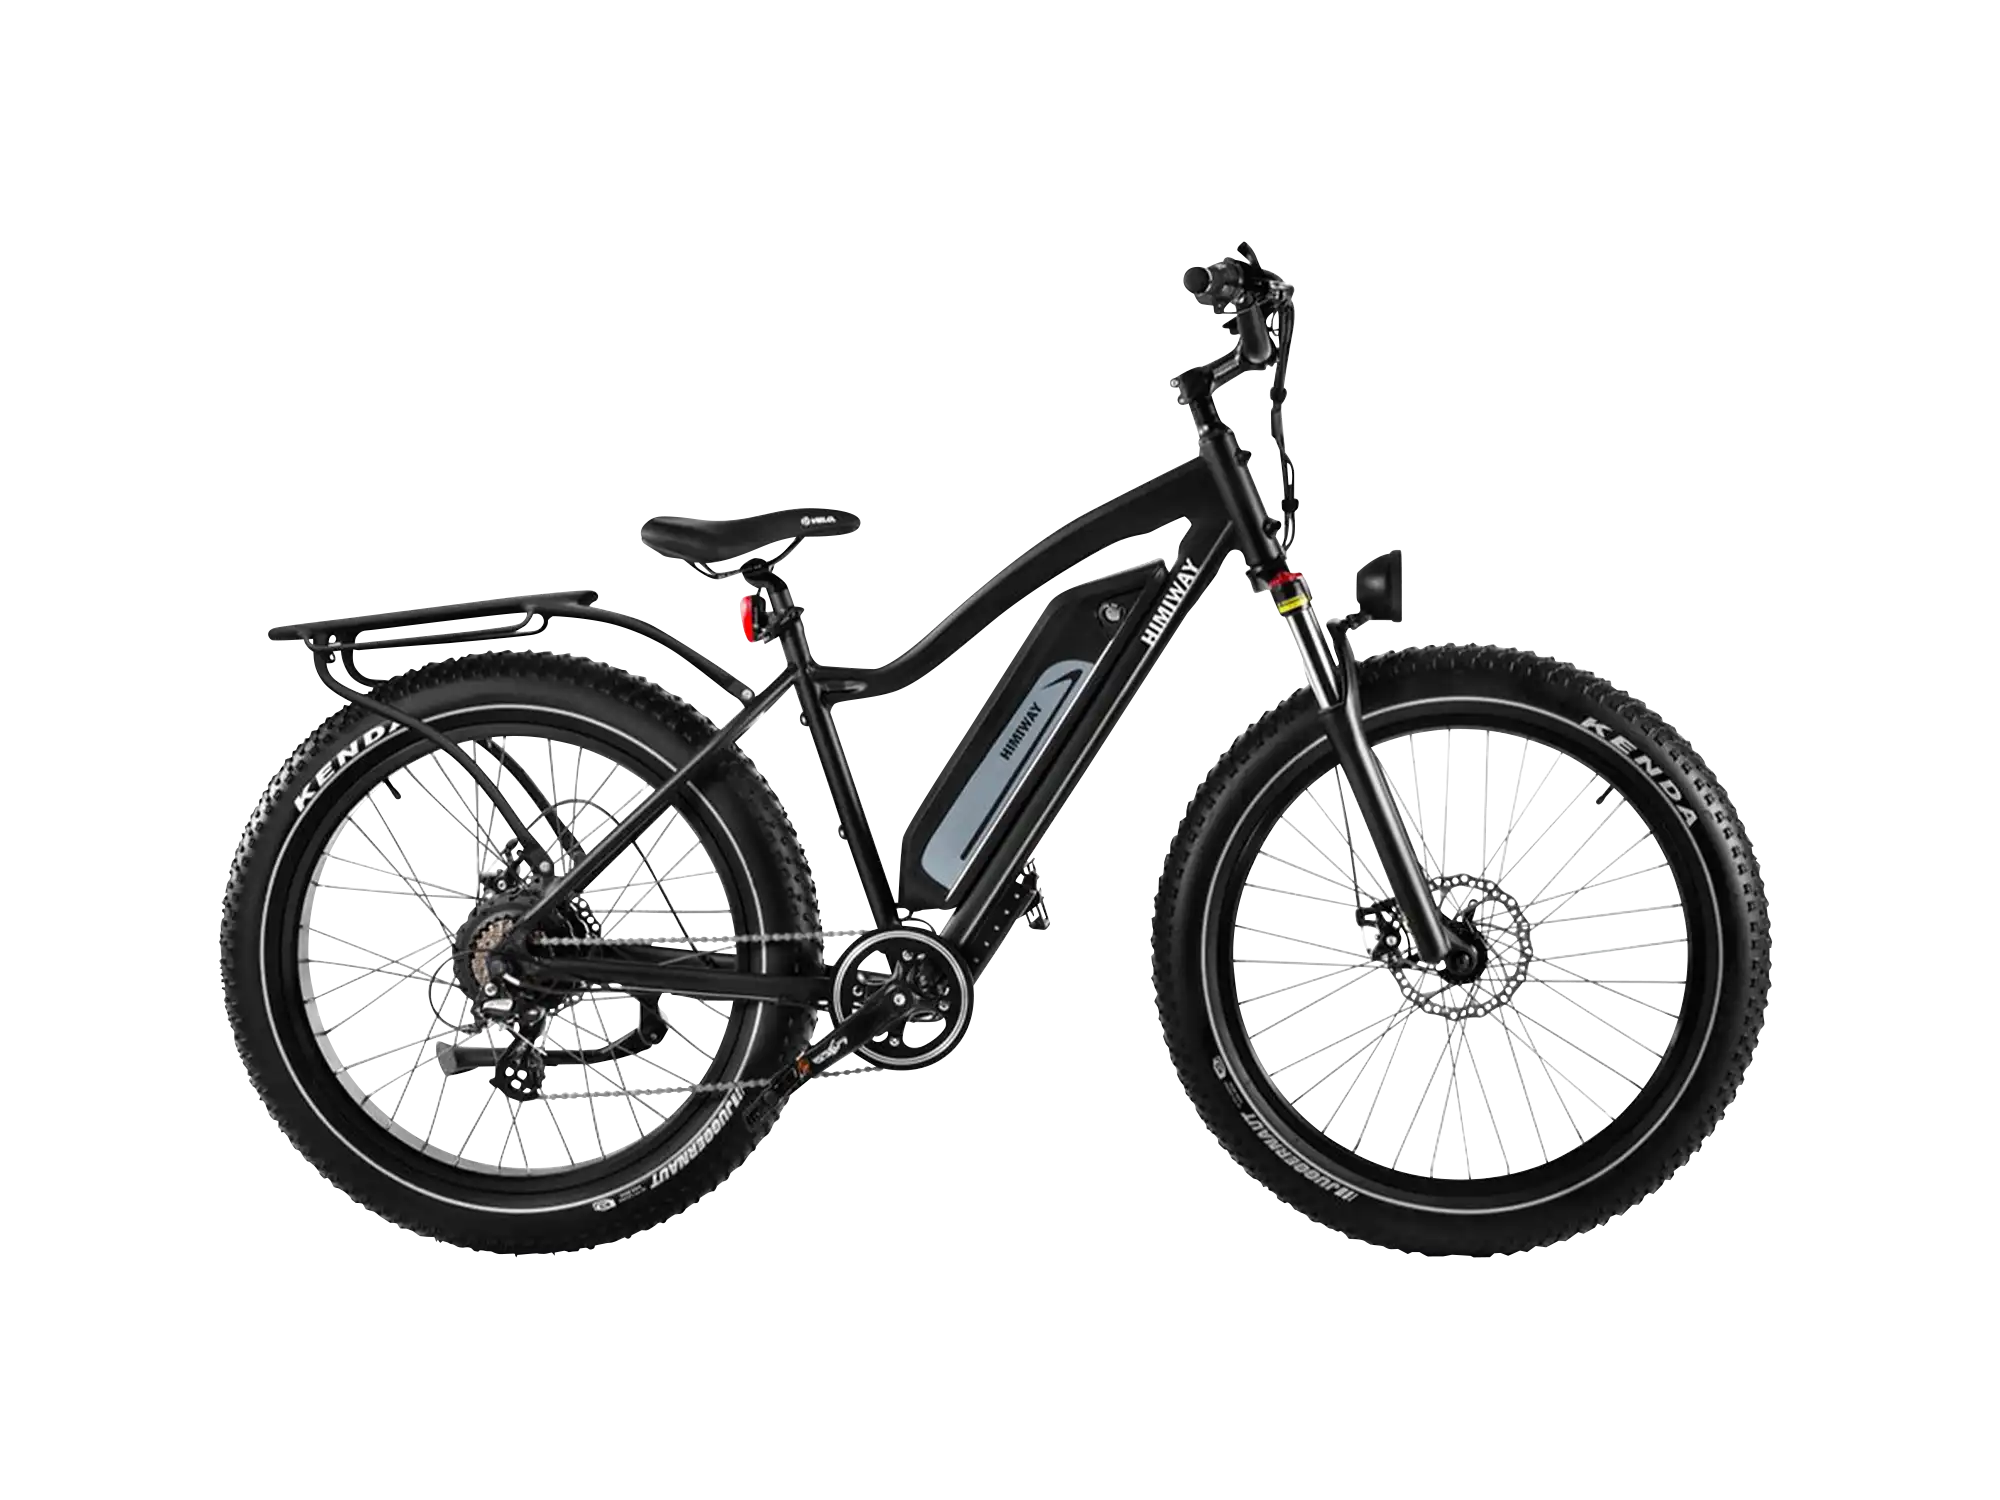 2020 Himiway Cruiser Review